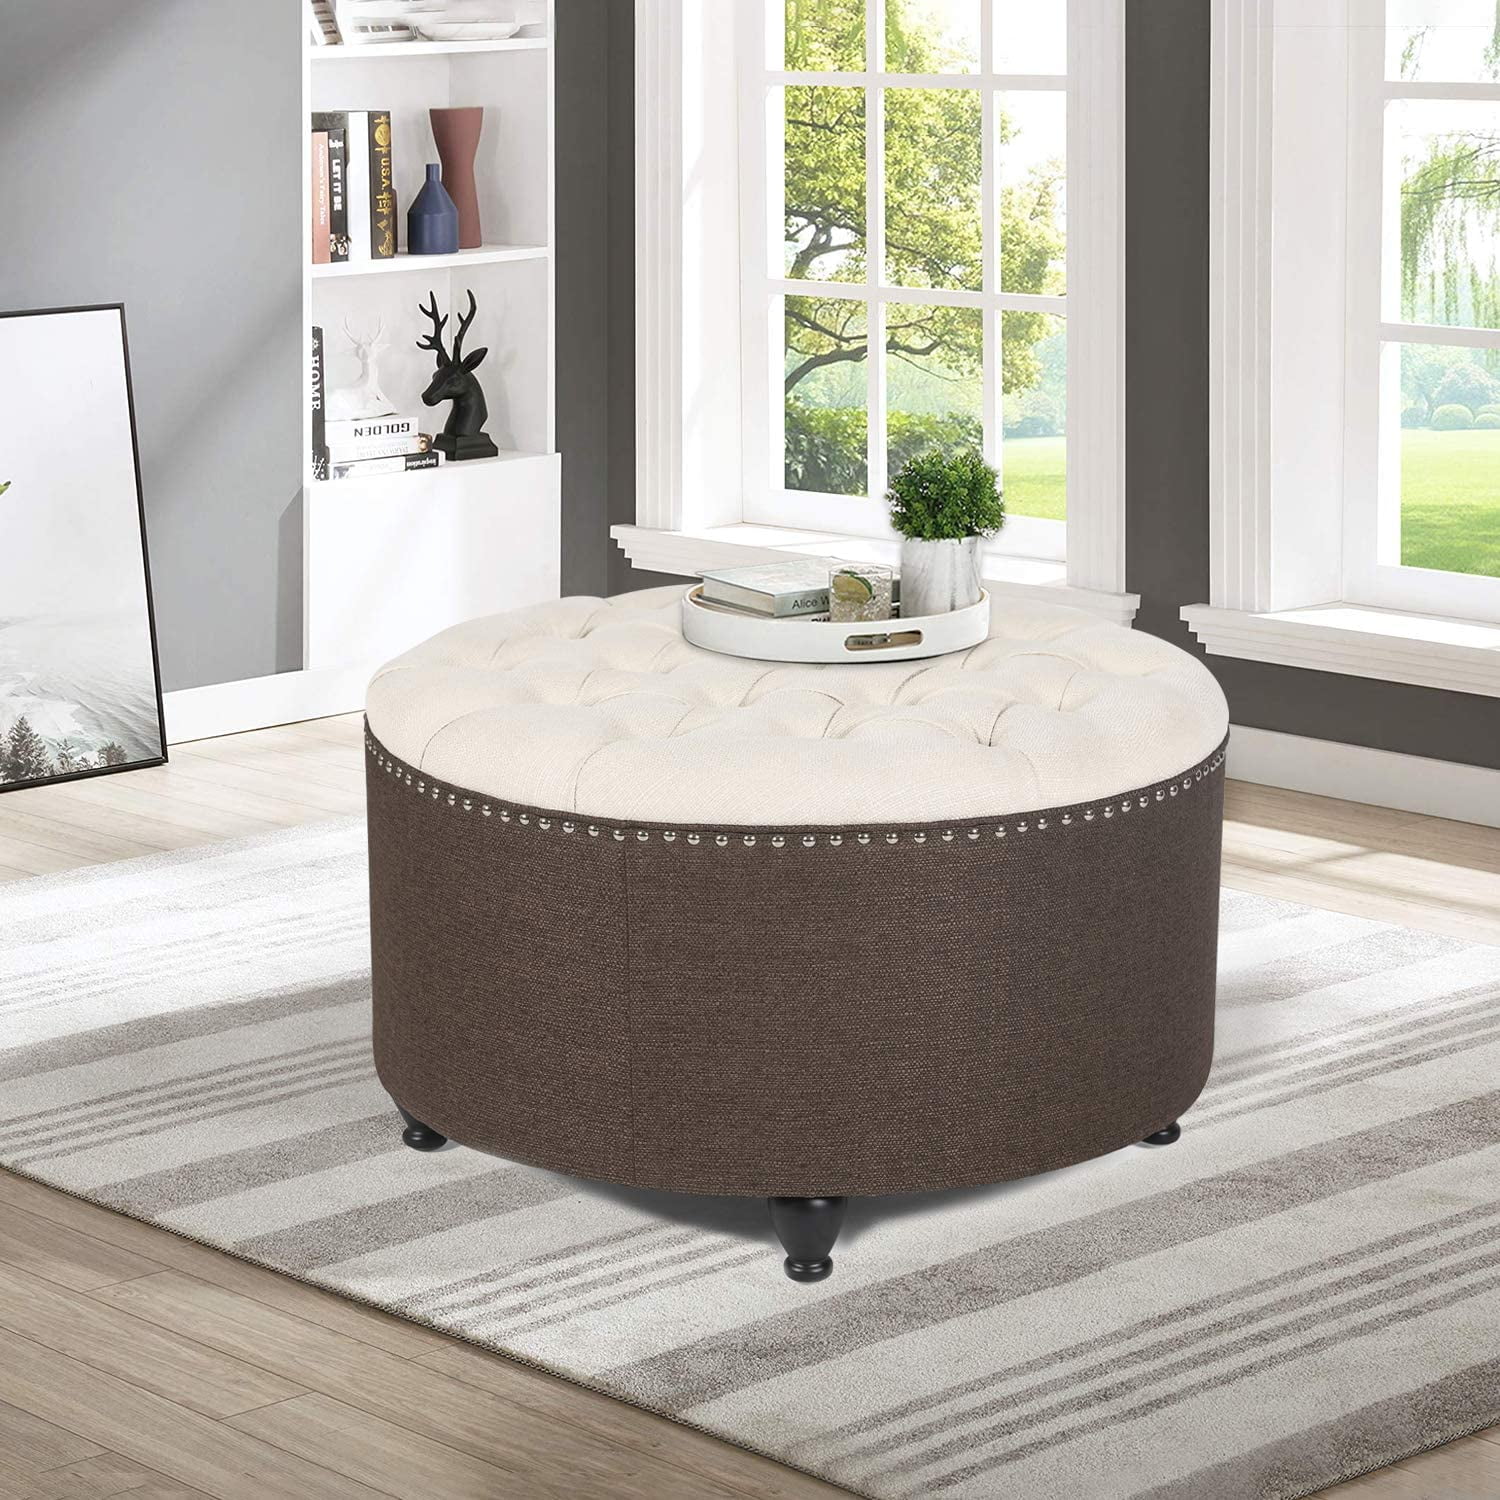 Homebeez Tufted Round Ottoman 28” Linen Upholstered Coffee Table